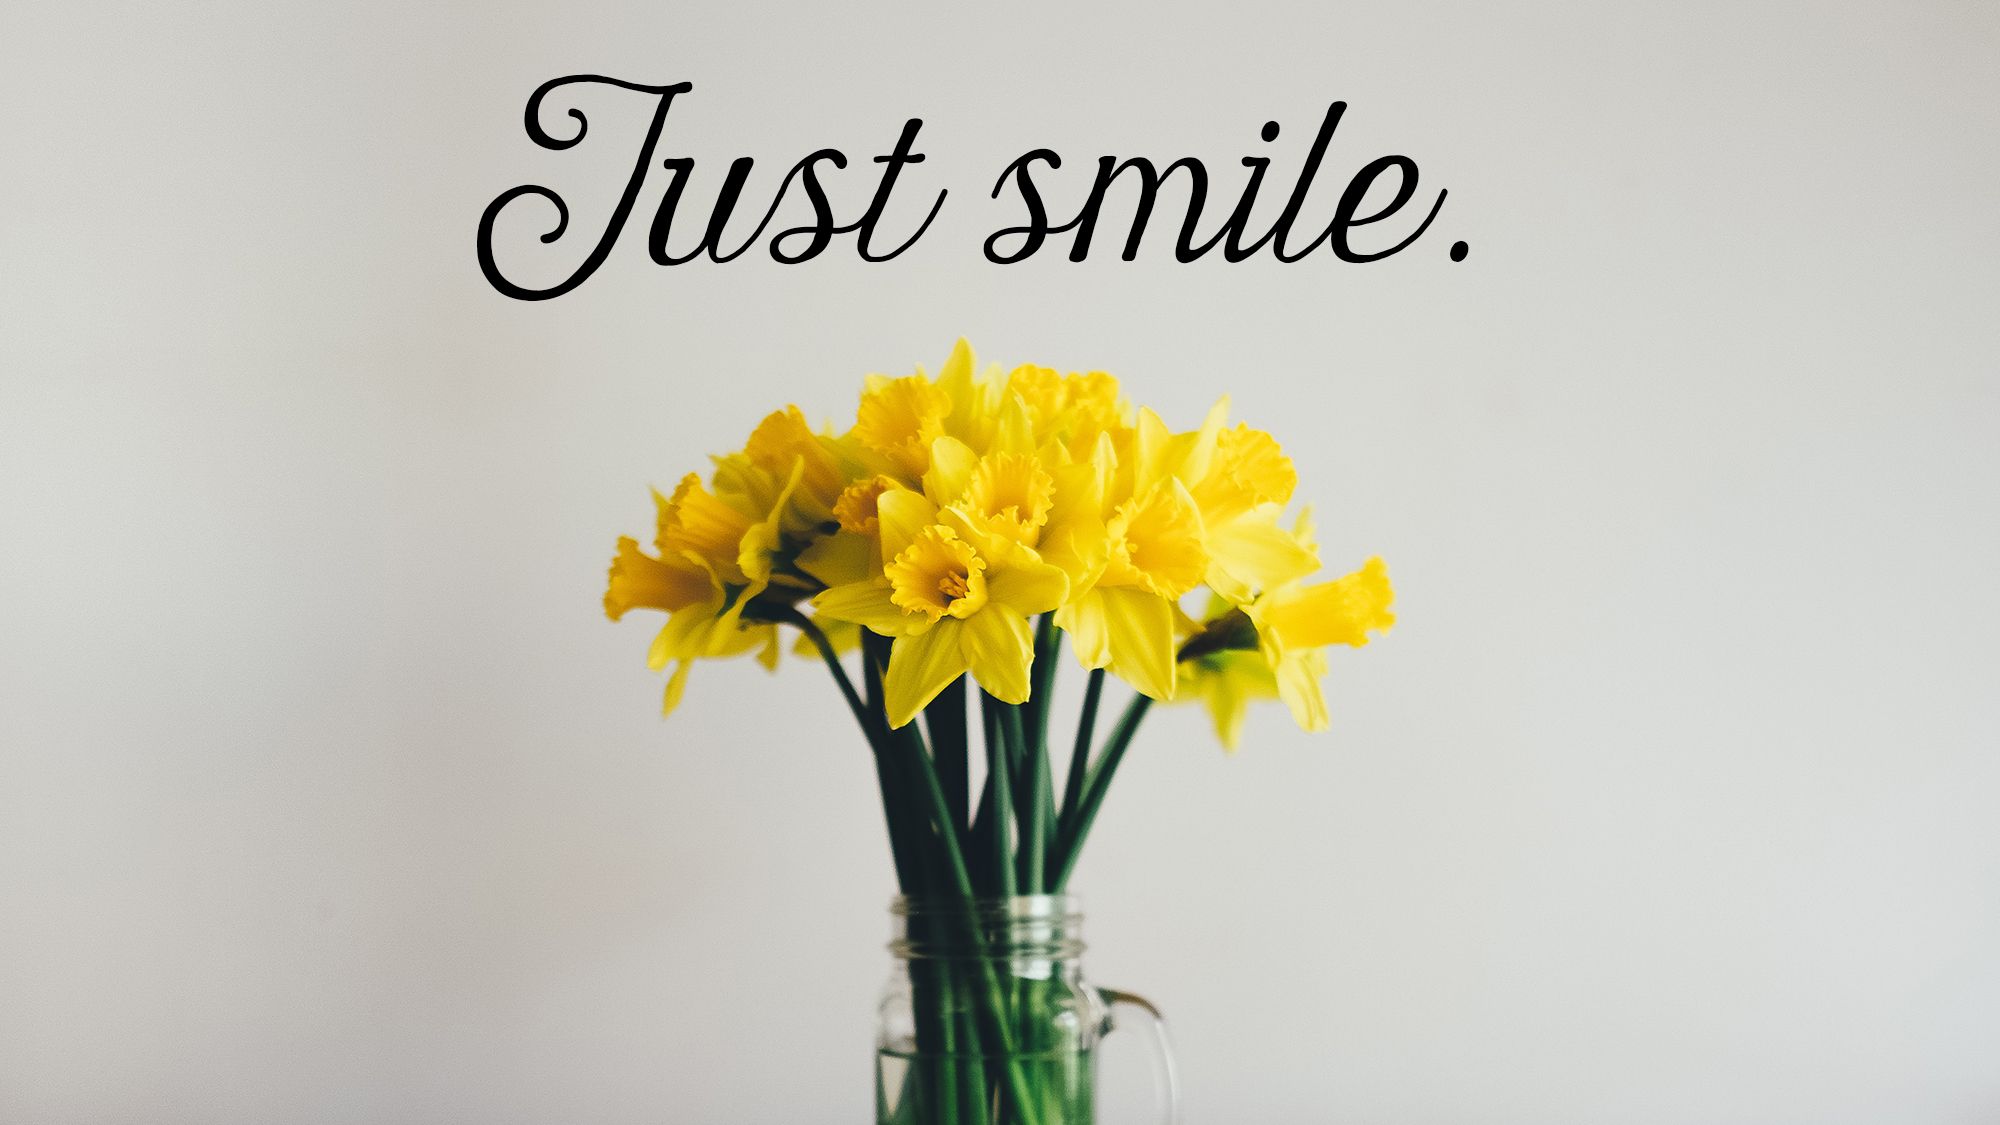 sweet quotes about smile